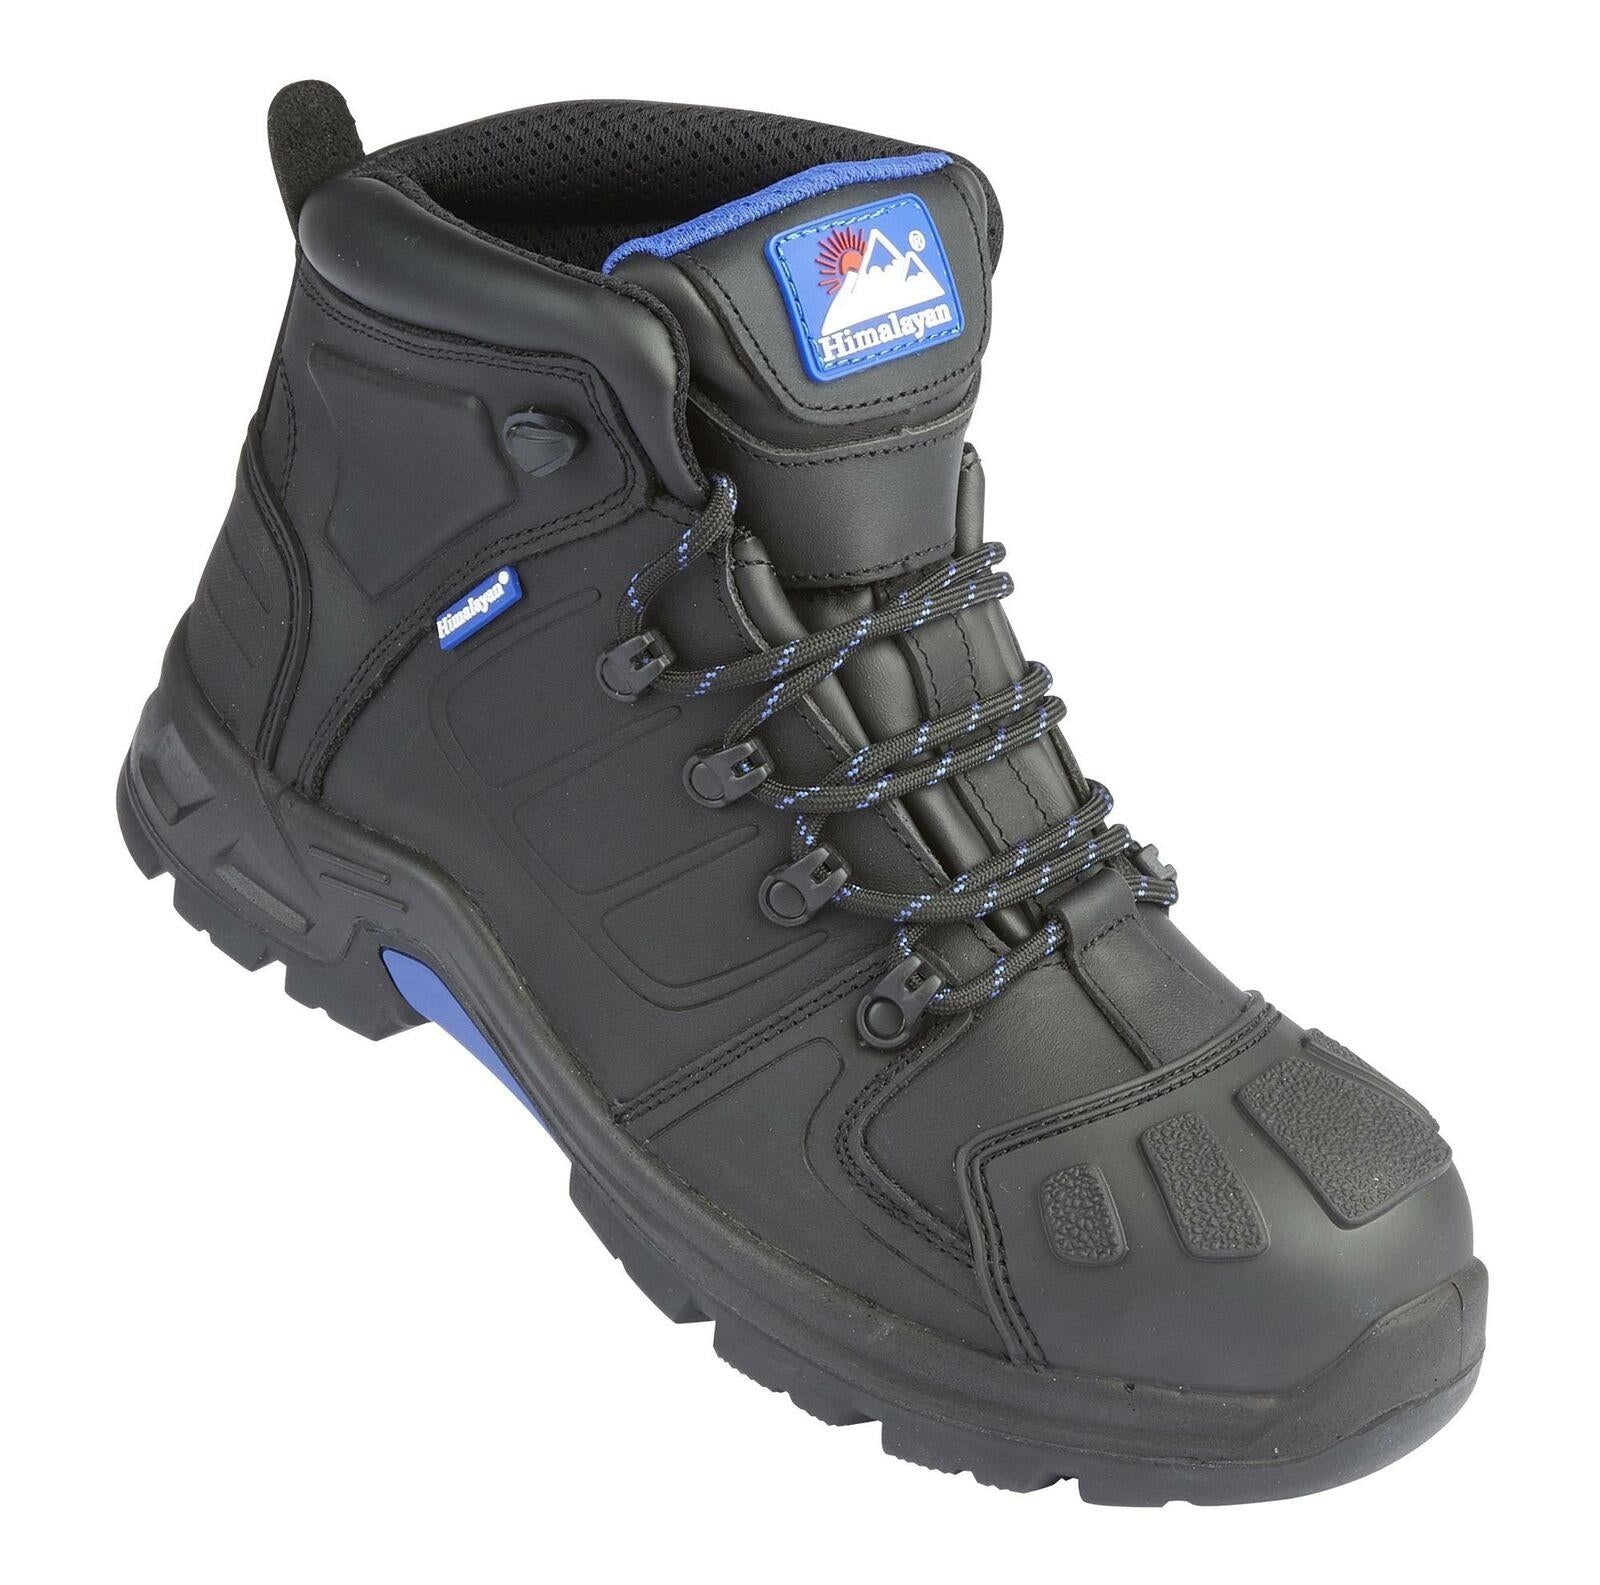 Himalayan Storm S3 black waterproof composite toe/midsole safety boot #5209